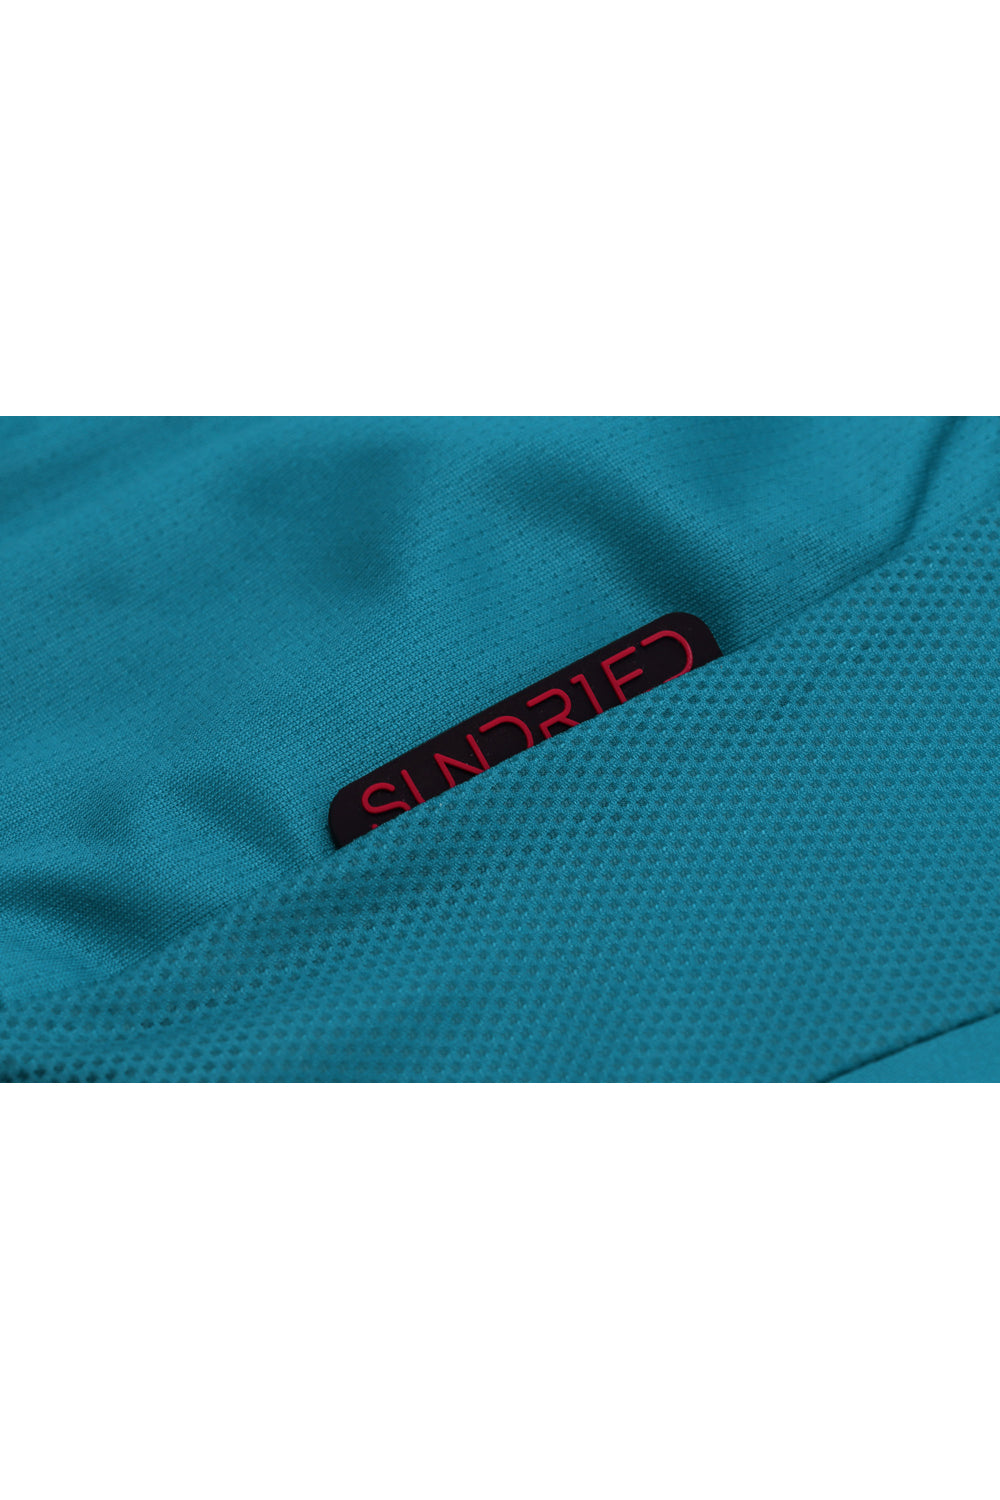 Sundried Turquoise Women's Short Sleeve Cycle Jersey Short Sleeve Jersey Activewear